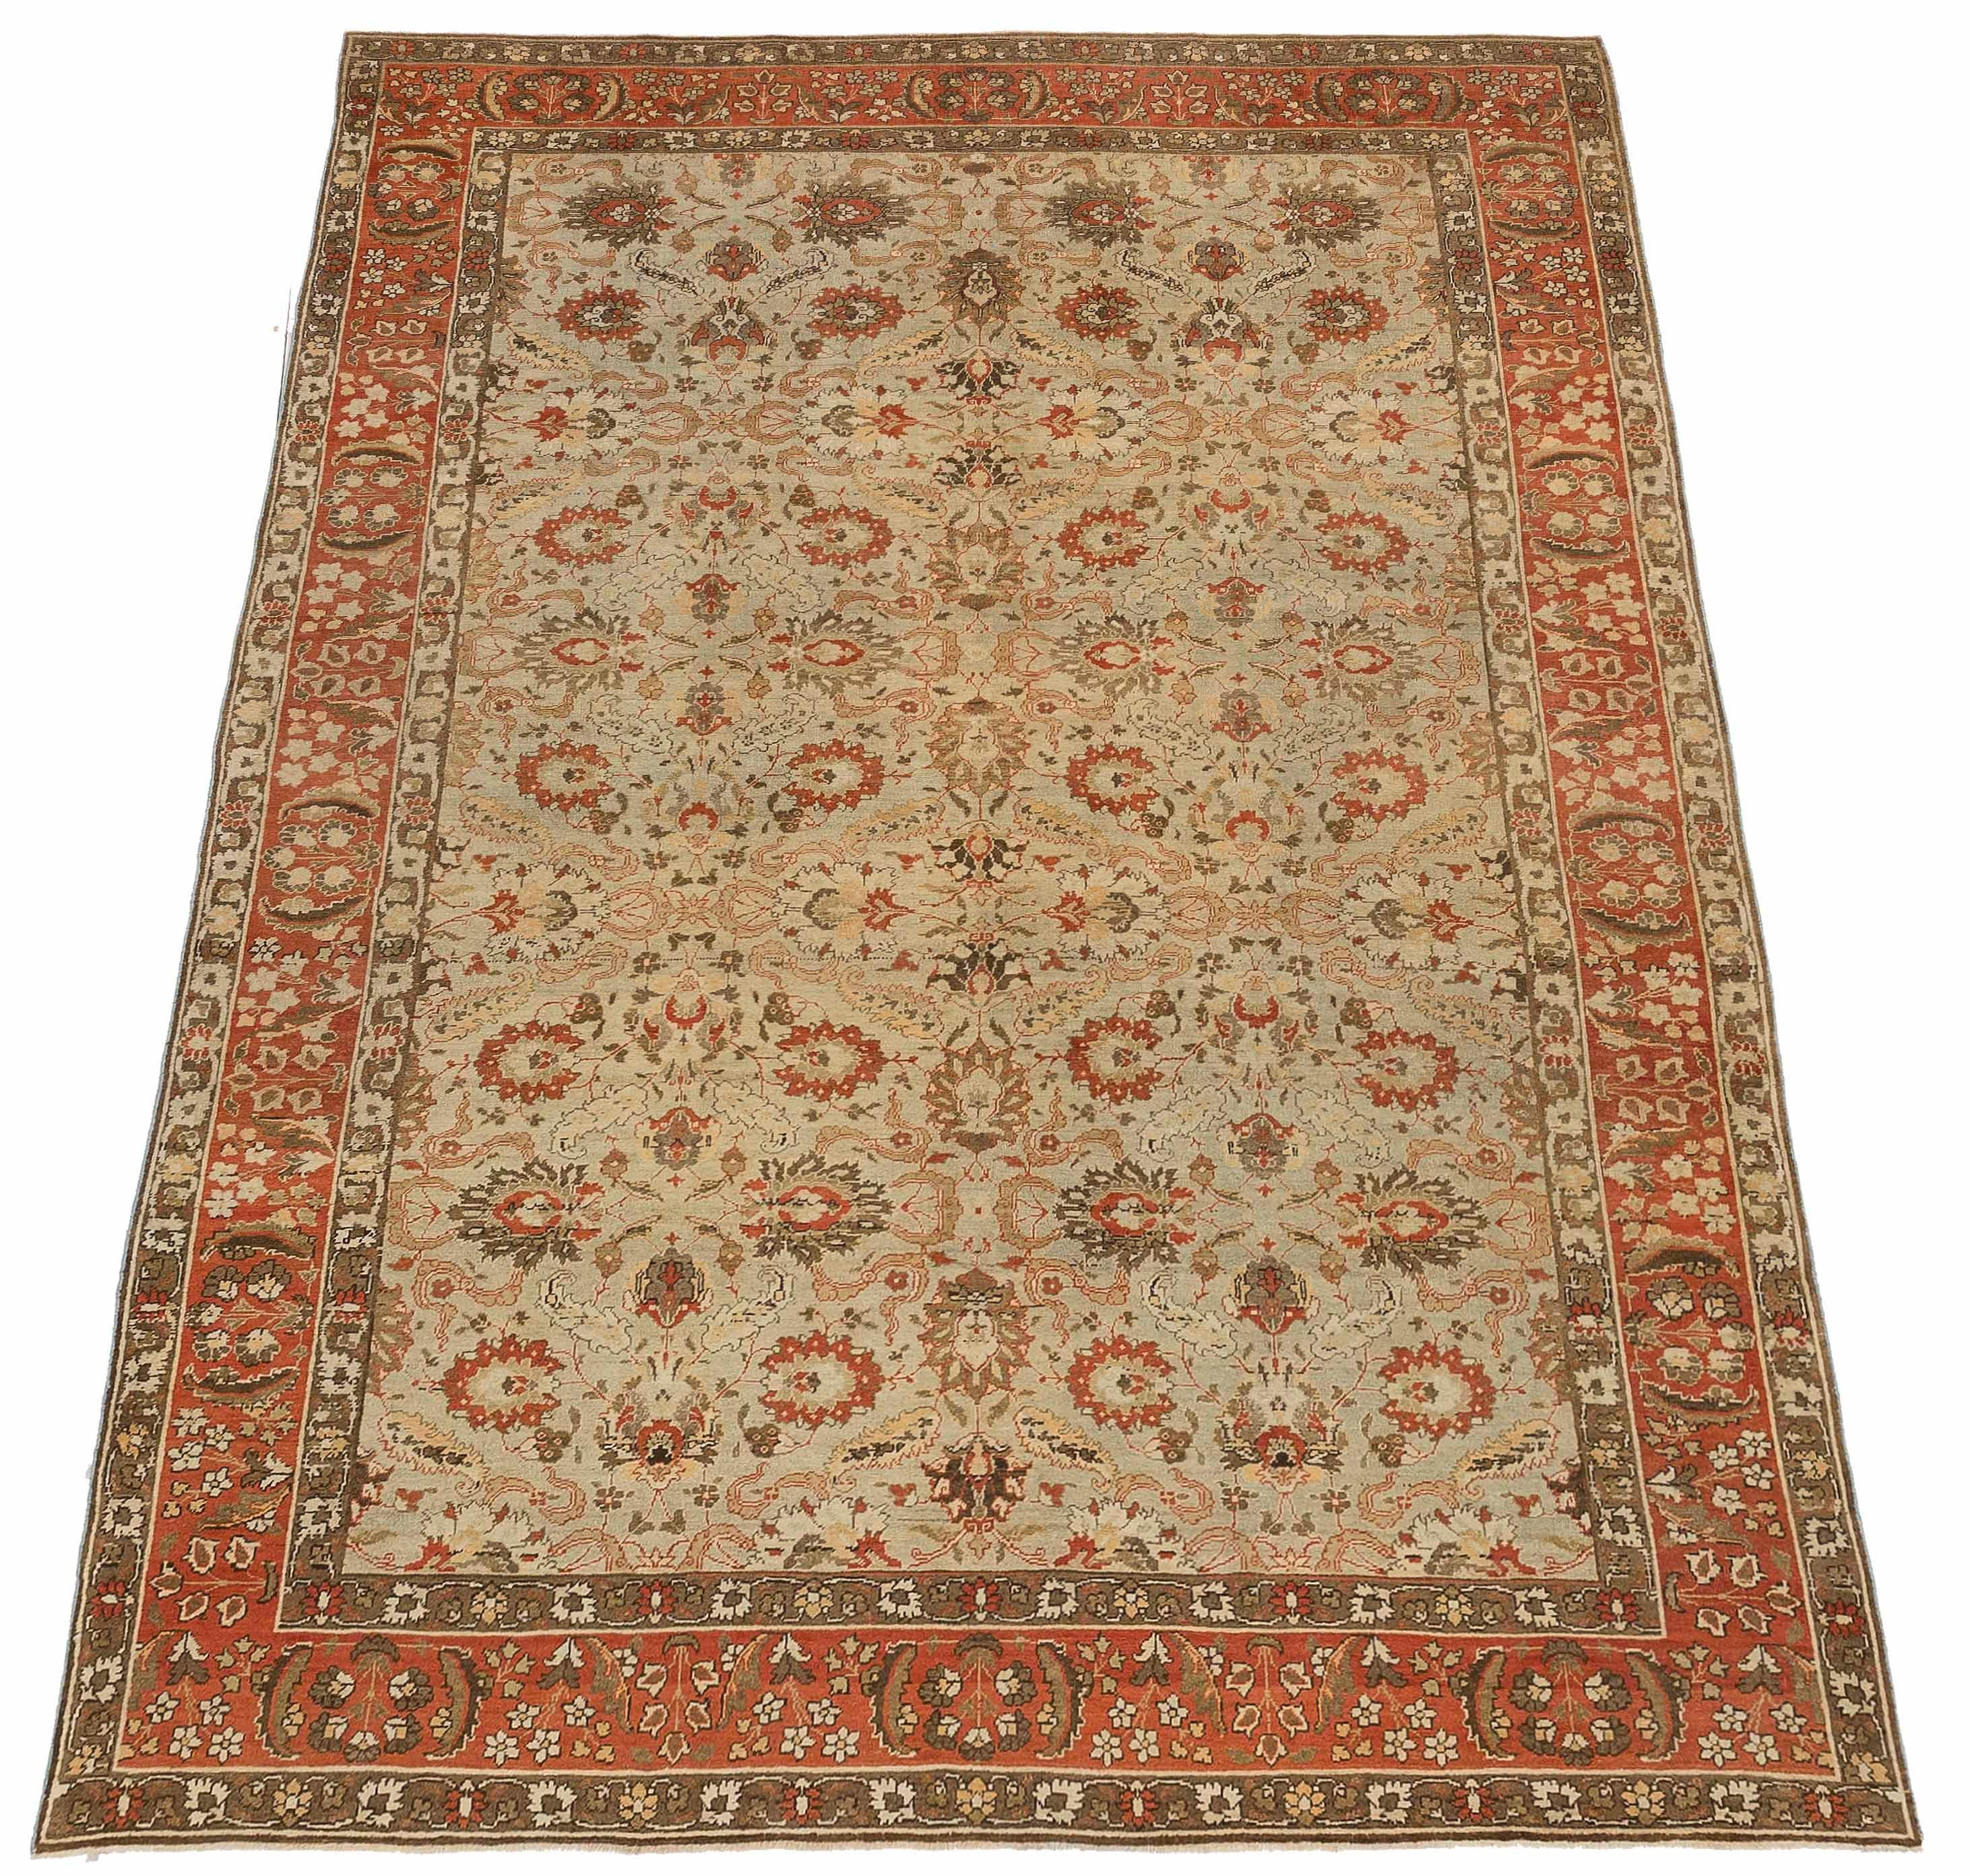 Antique Persian area rug handwoven from the finest sheep’s wool. It’s colored with all-natural vegetable dyes that are safe for humans and pets. It’s a traditional Khoy design handwoven by expert artisans. It’s a lovely area rug that can be